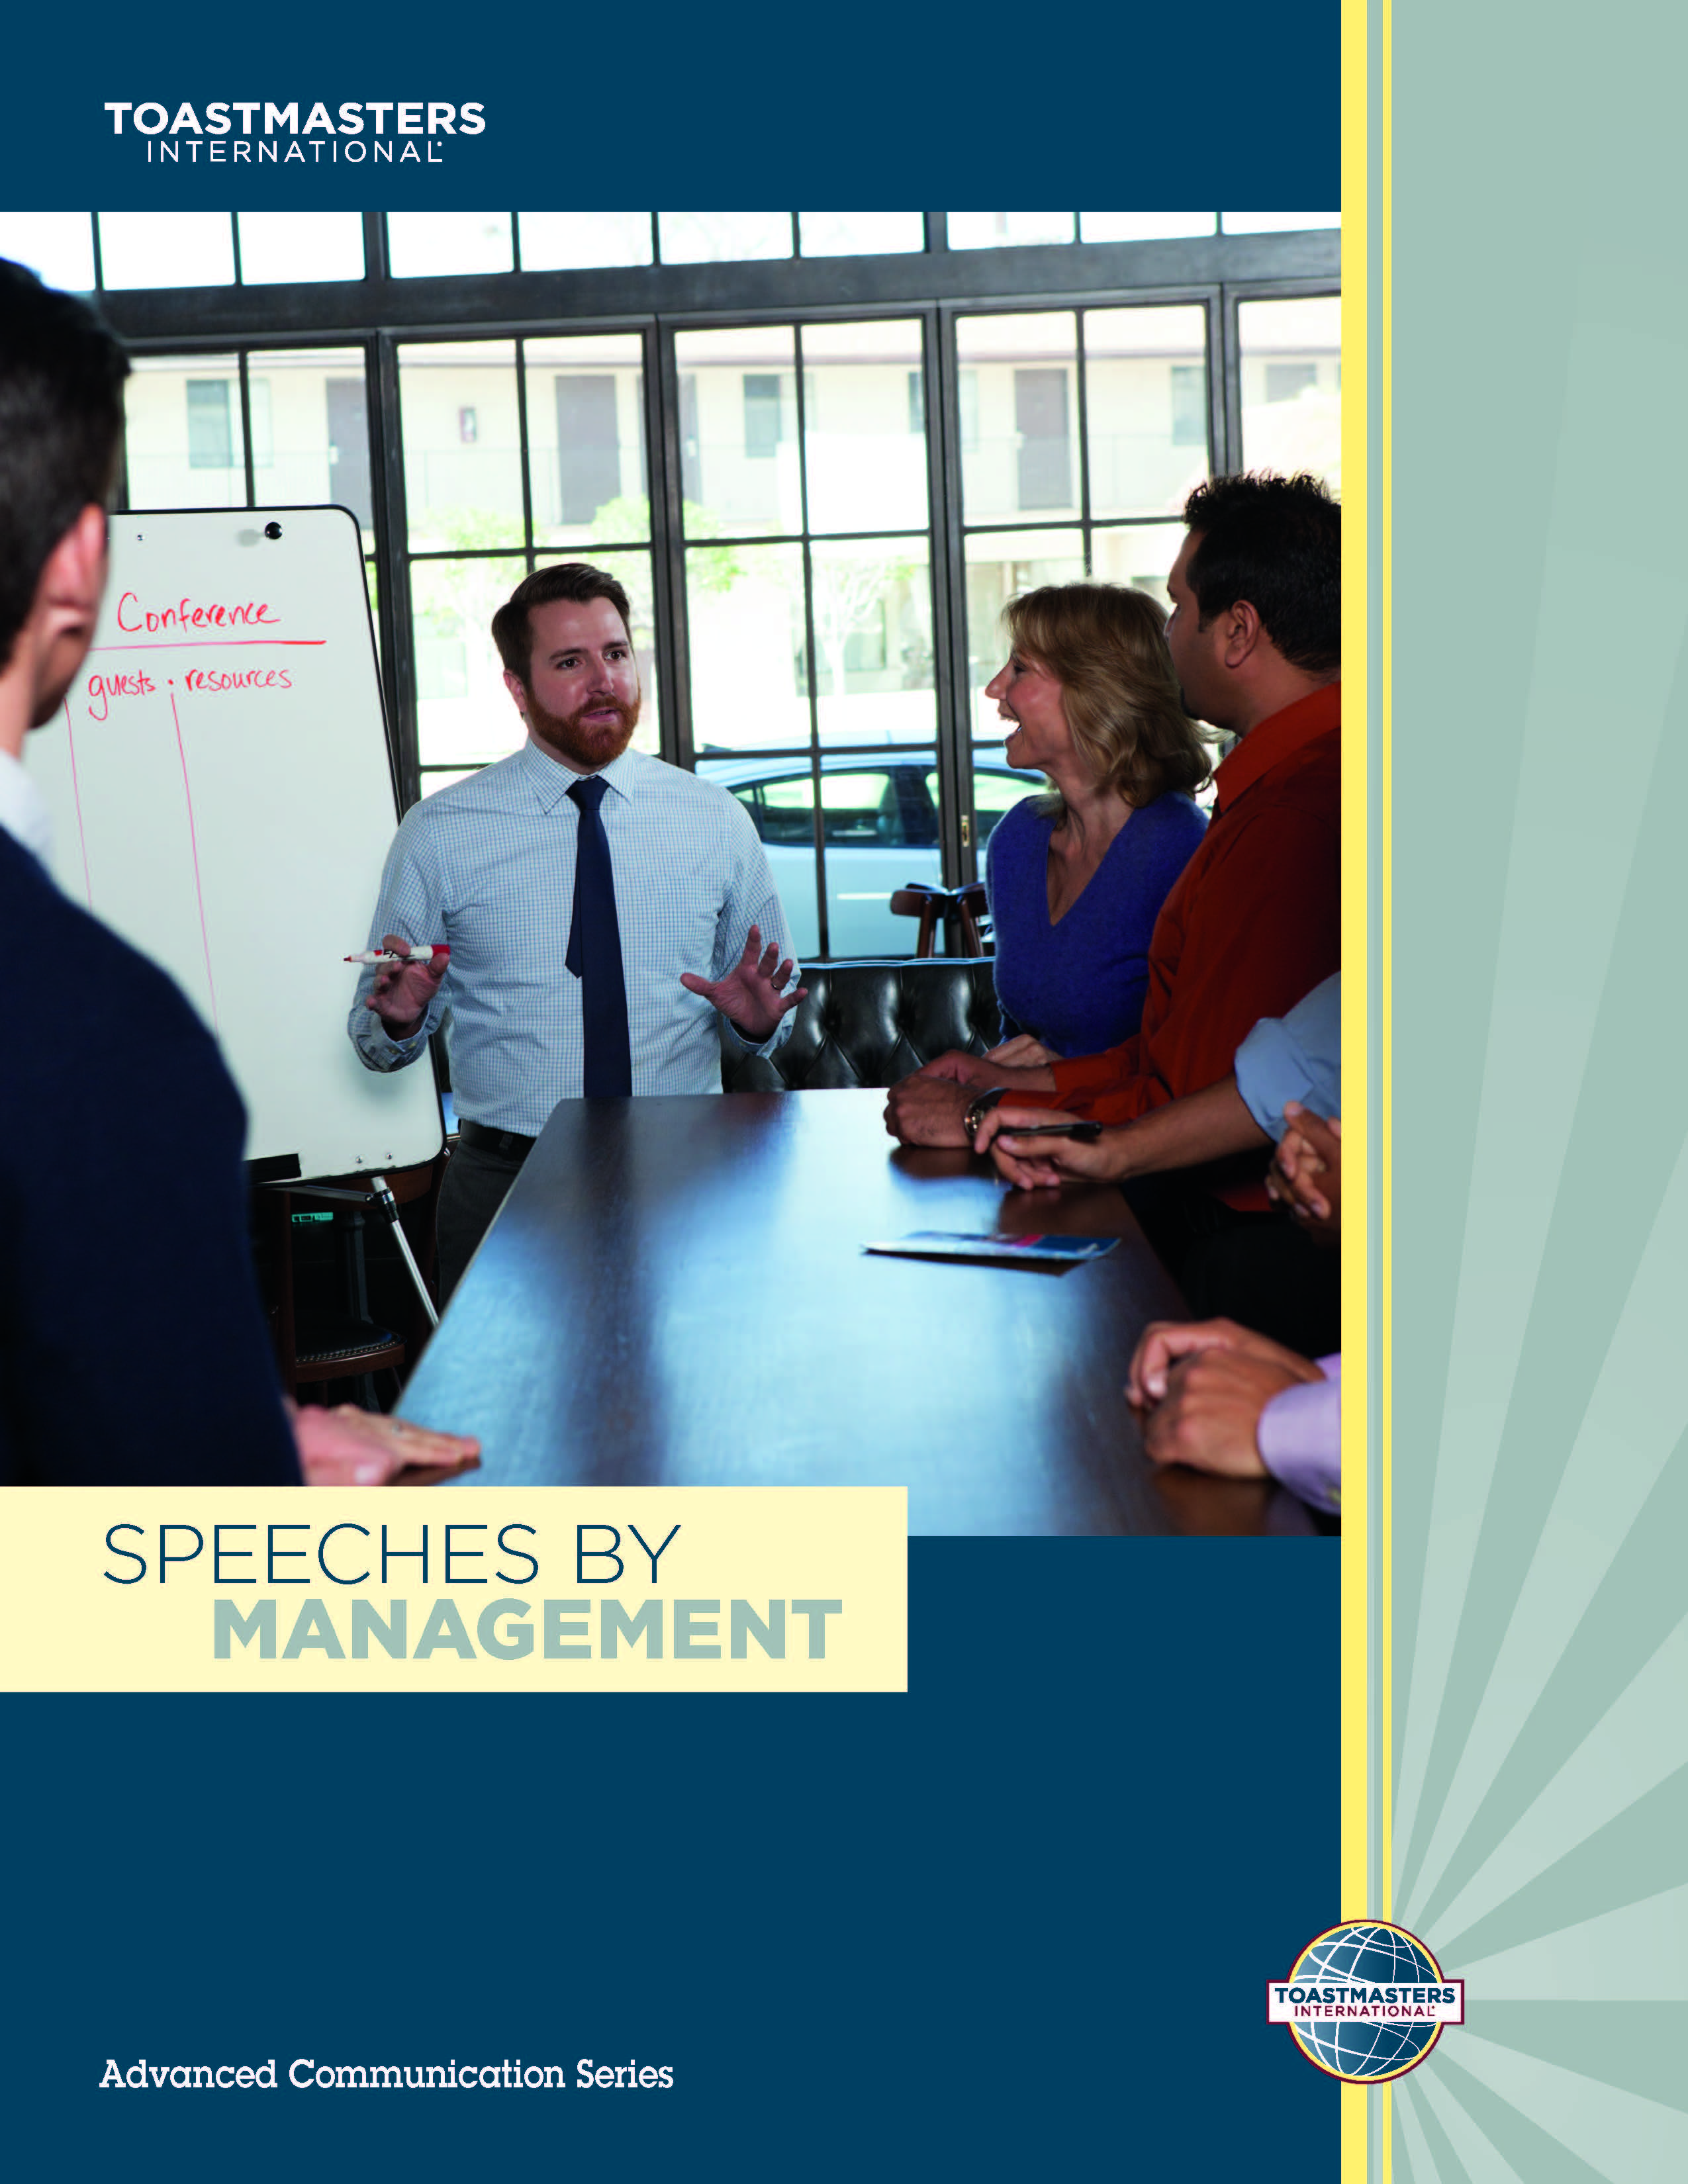 Cover of the "Speeches by Management" advanced manual